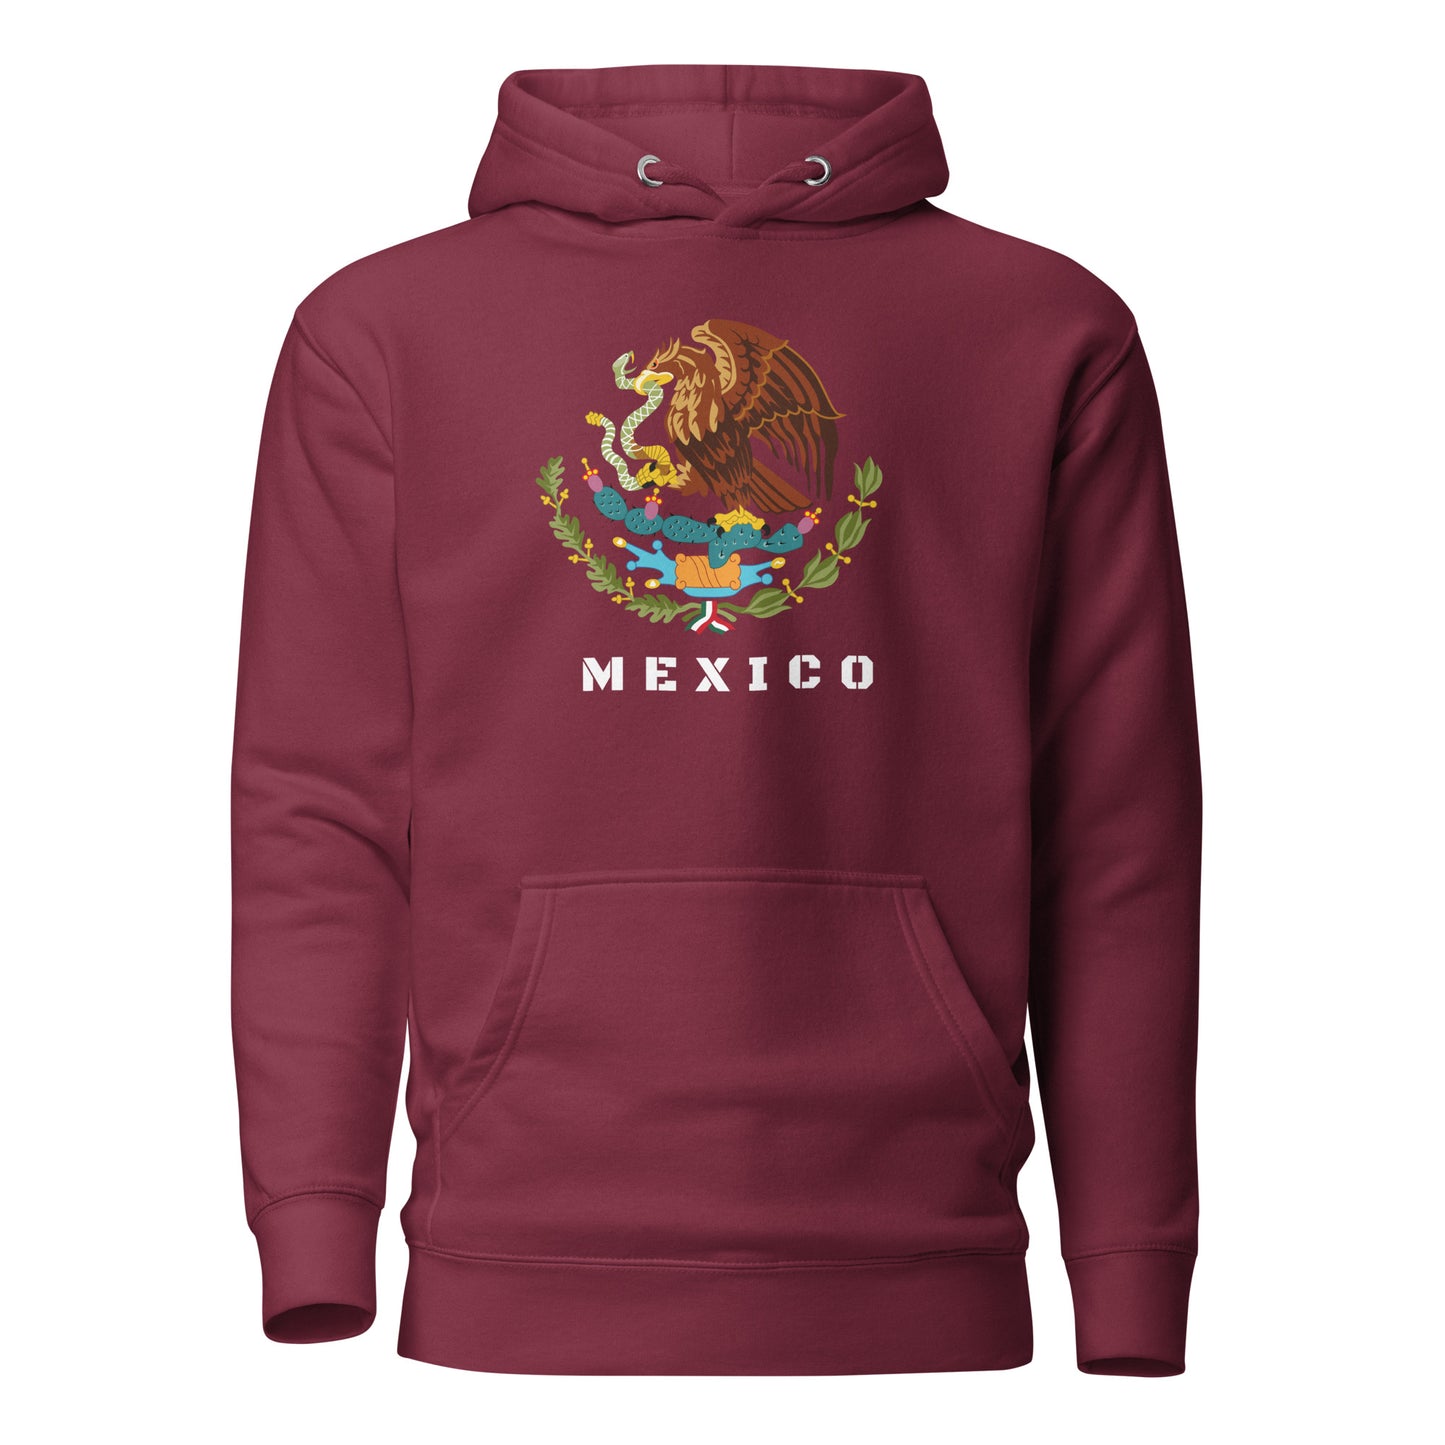 Mexico- Hoodie